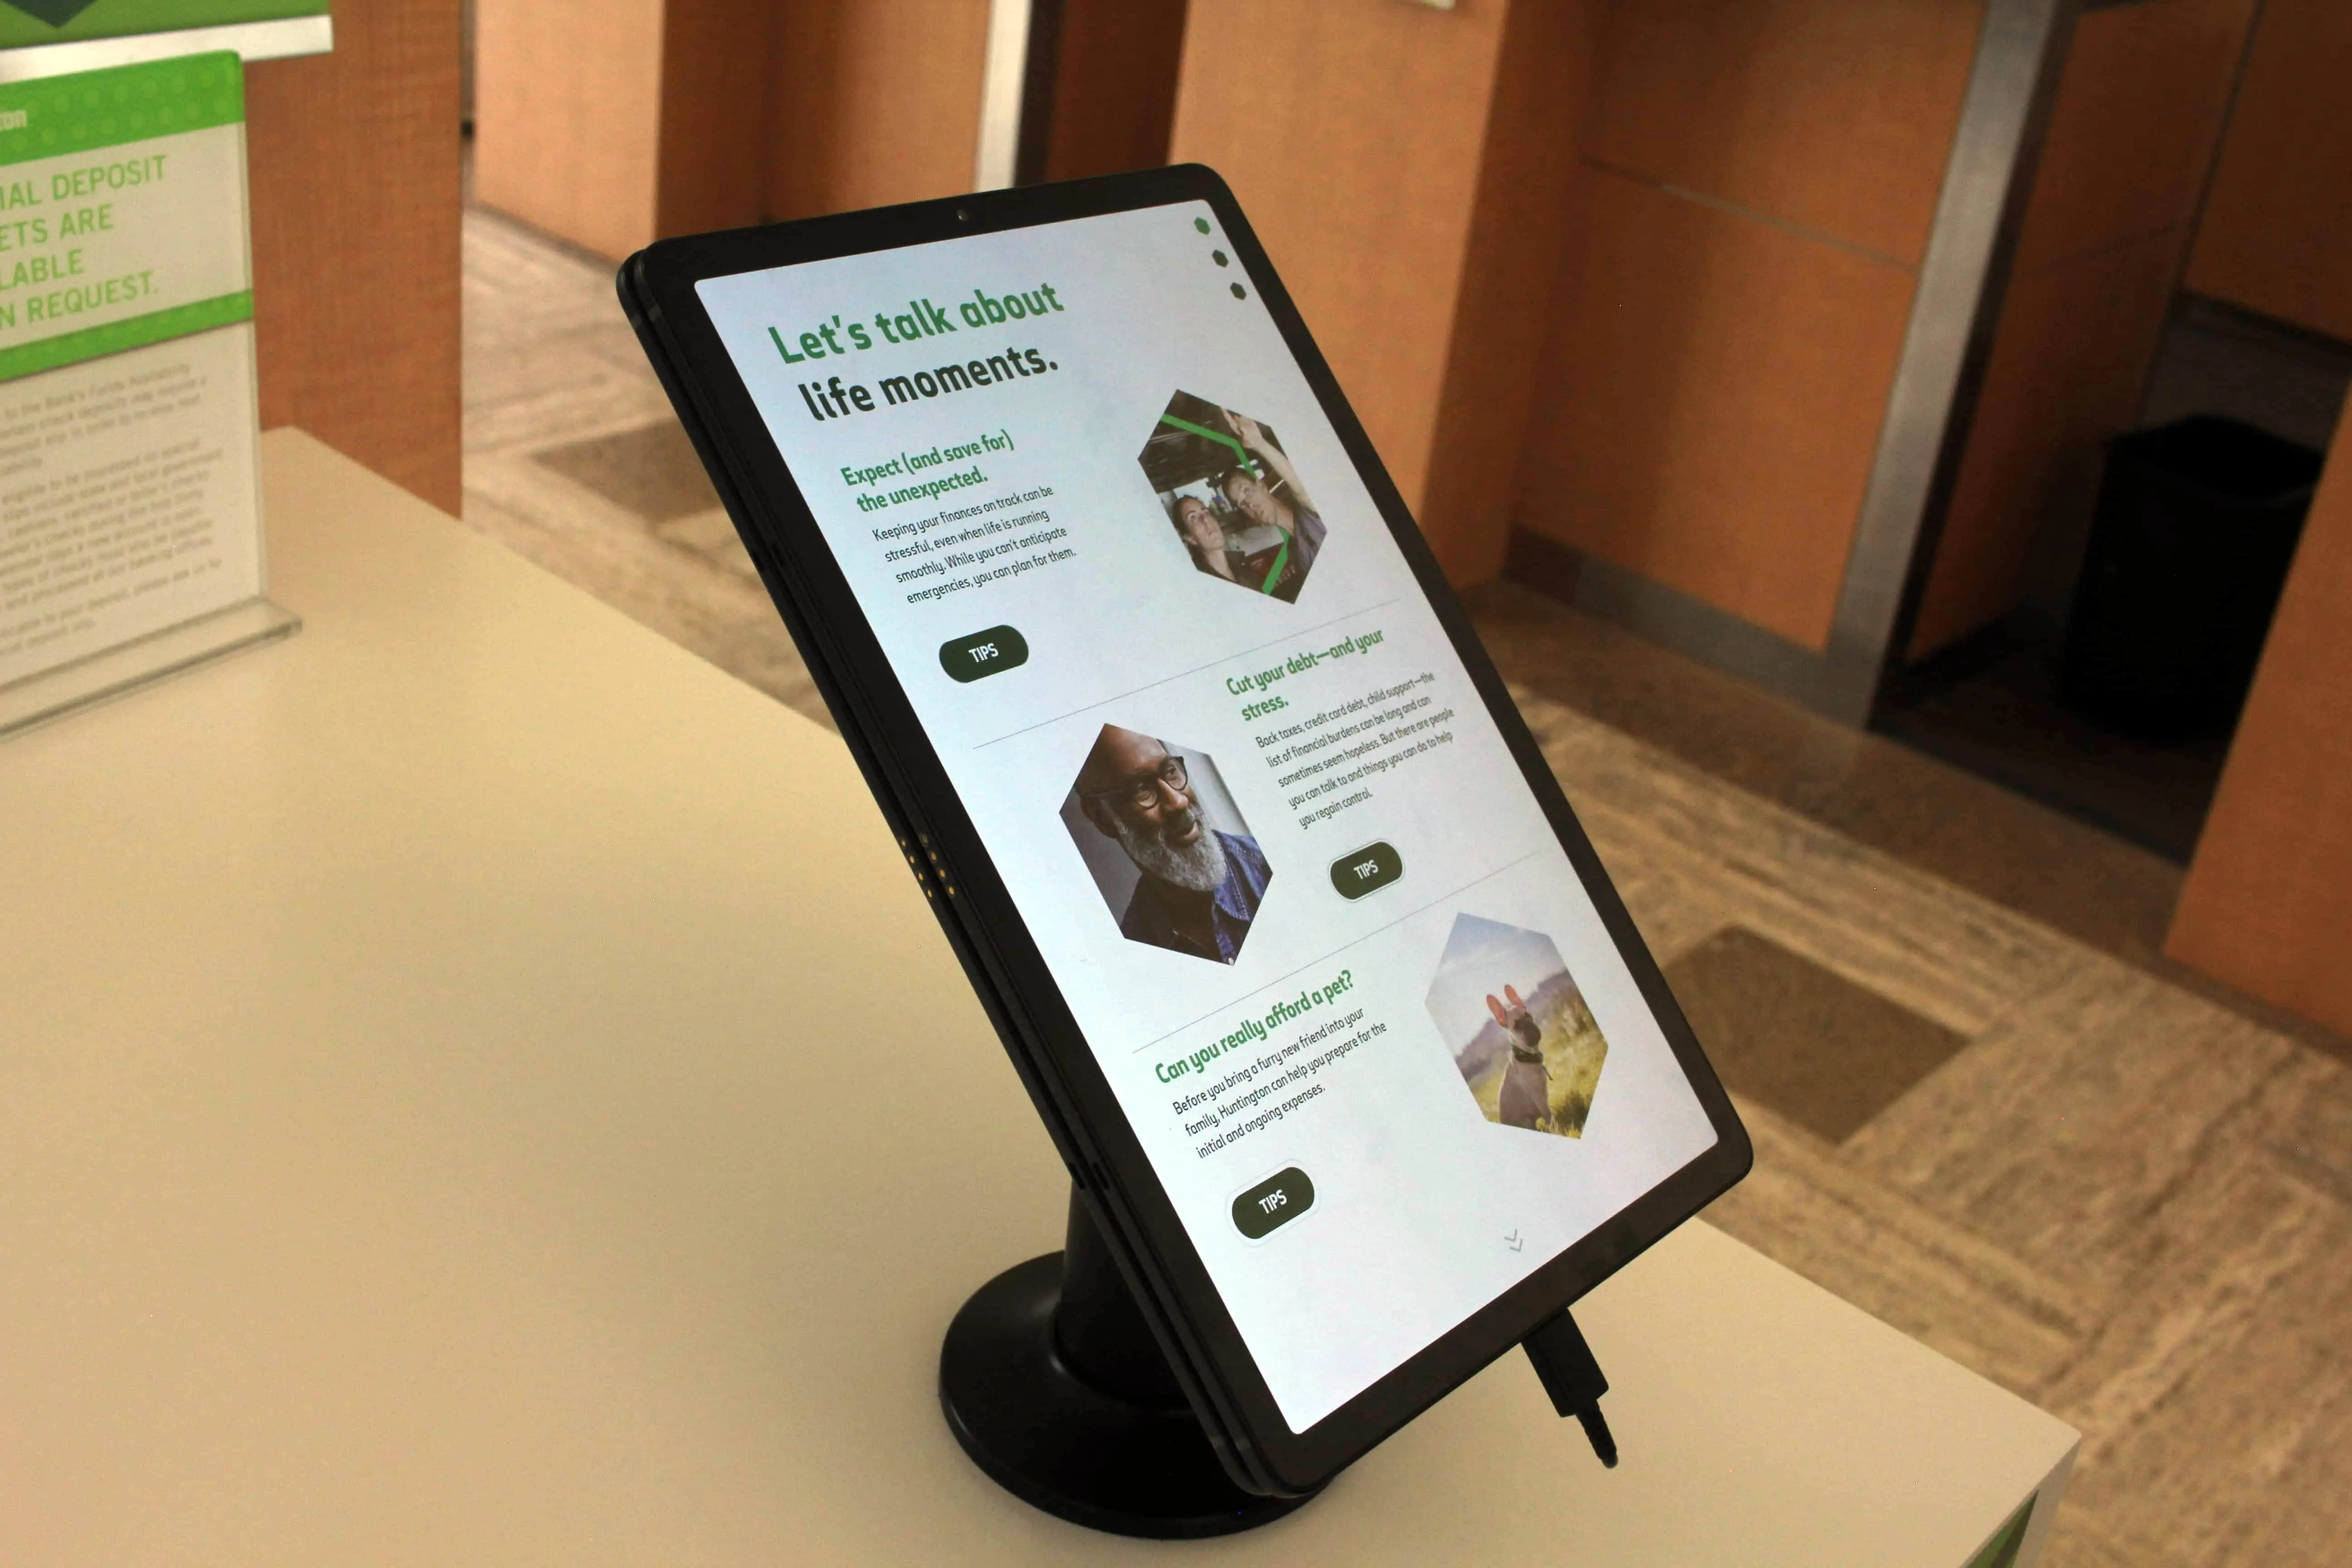 Image of a tablet mounted on a desk with Huntington Bank tips listed on the screen with touchscreen capabilities